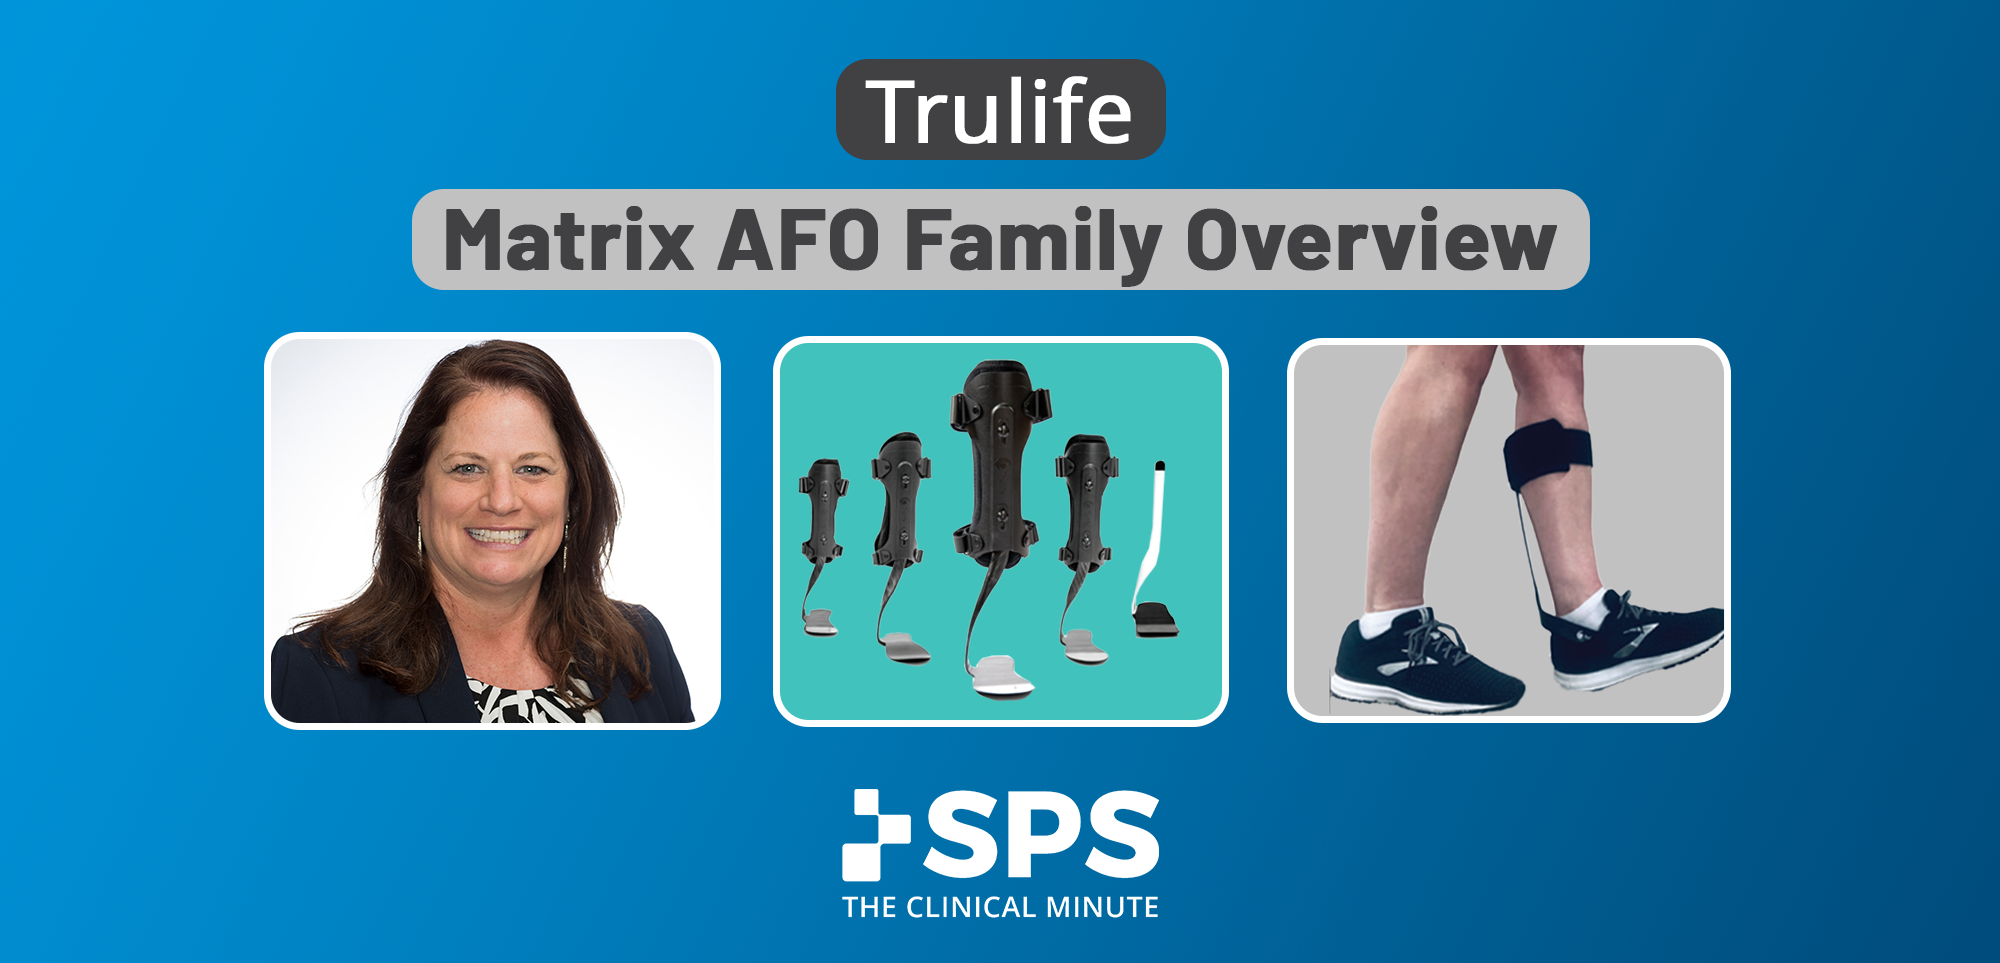 The Clinical Minute: Trulife Matrix AFO Family Overview